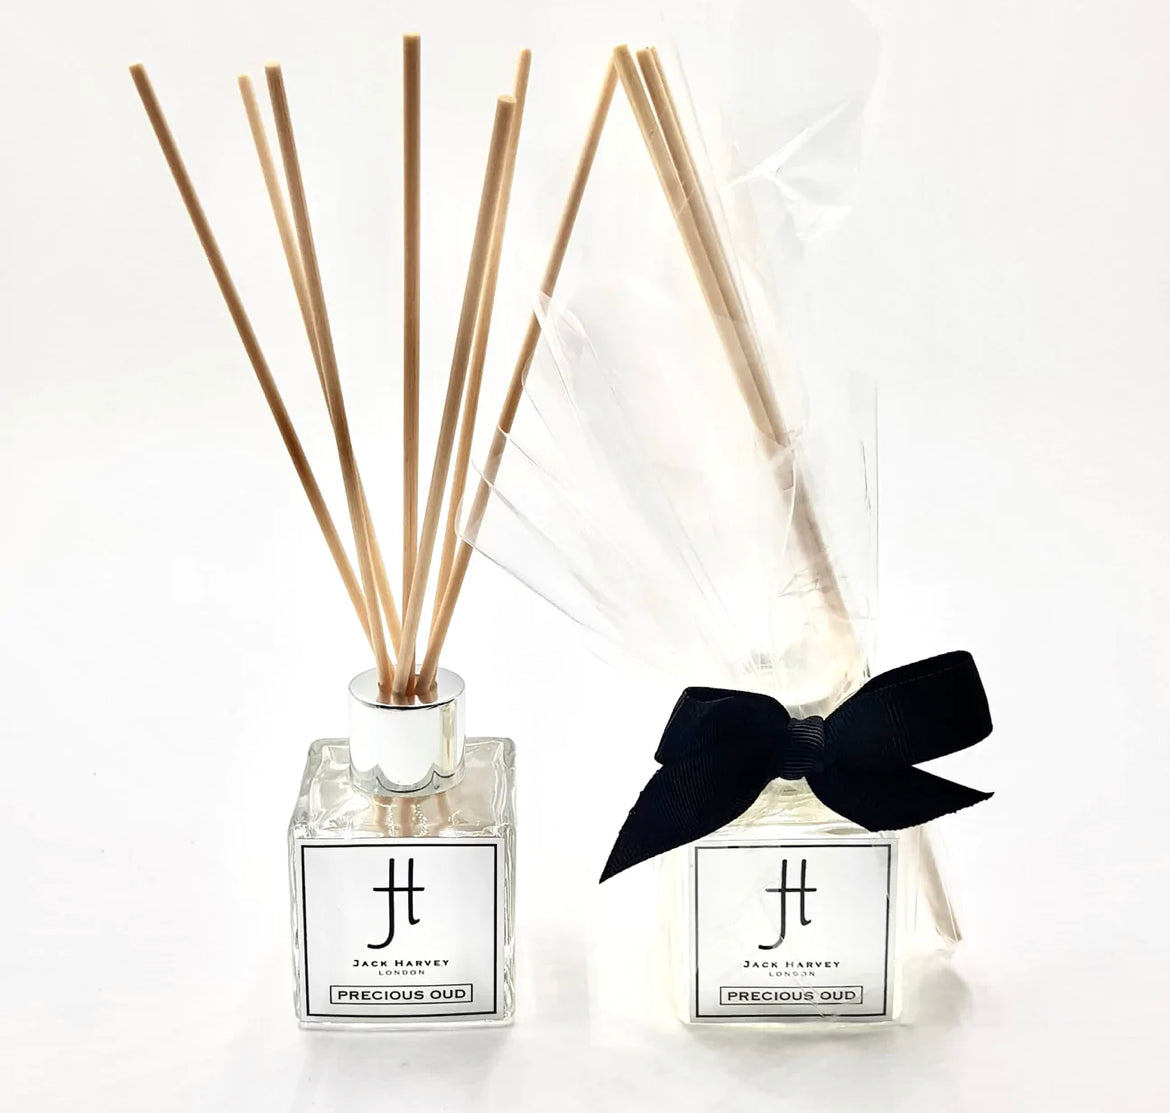 LONDON OUD MINI 50ml LIMITED EDITION - LUXURY REED DIFFUSER